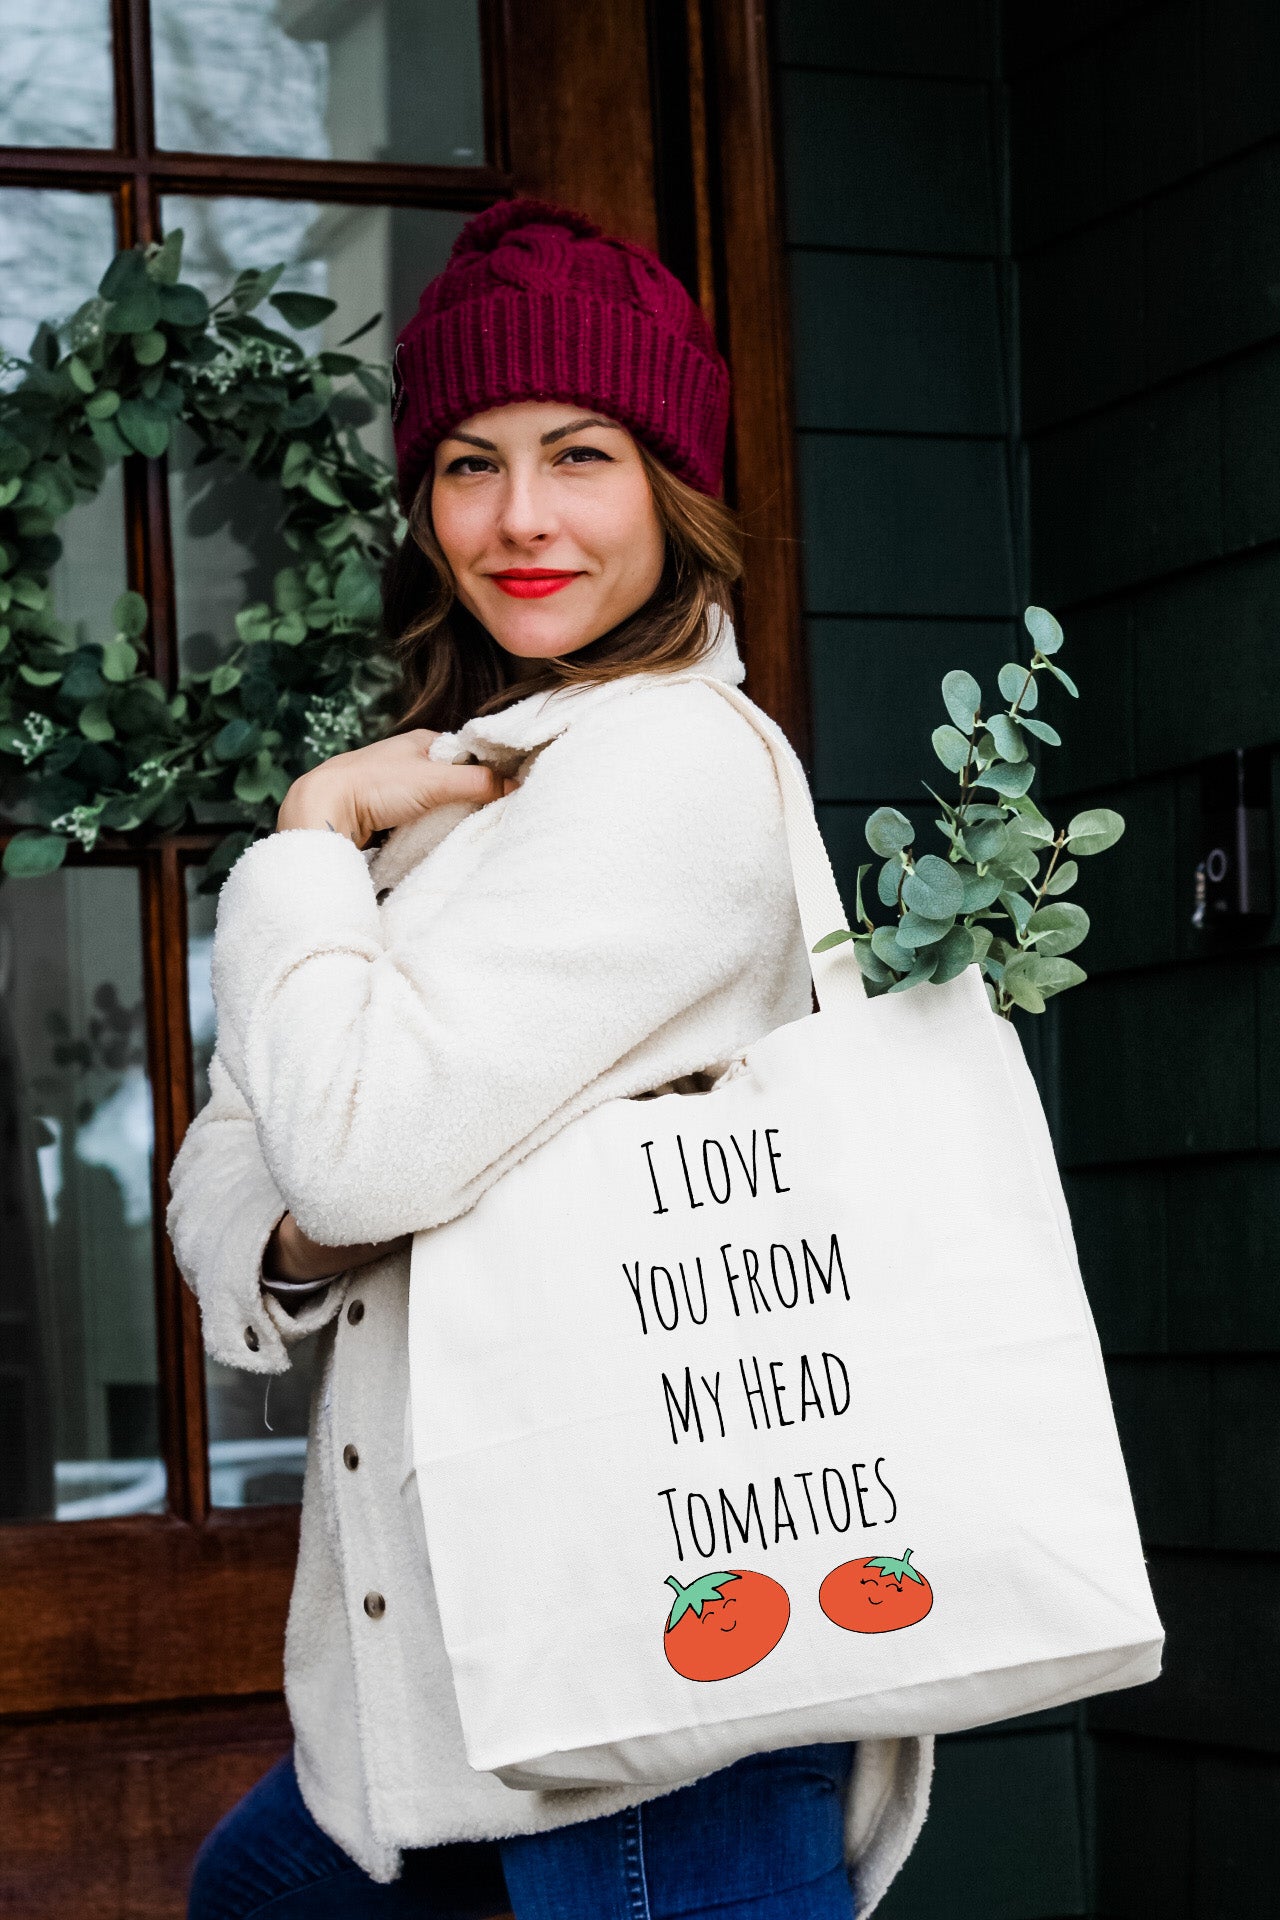 a woman holding a bag that says i love you from my head tomatoes